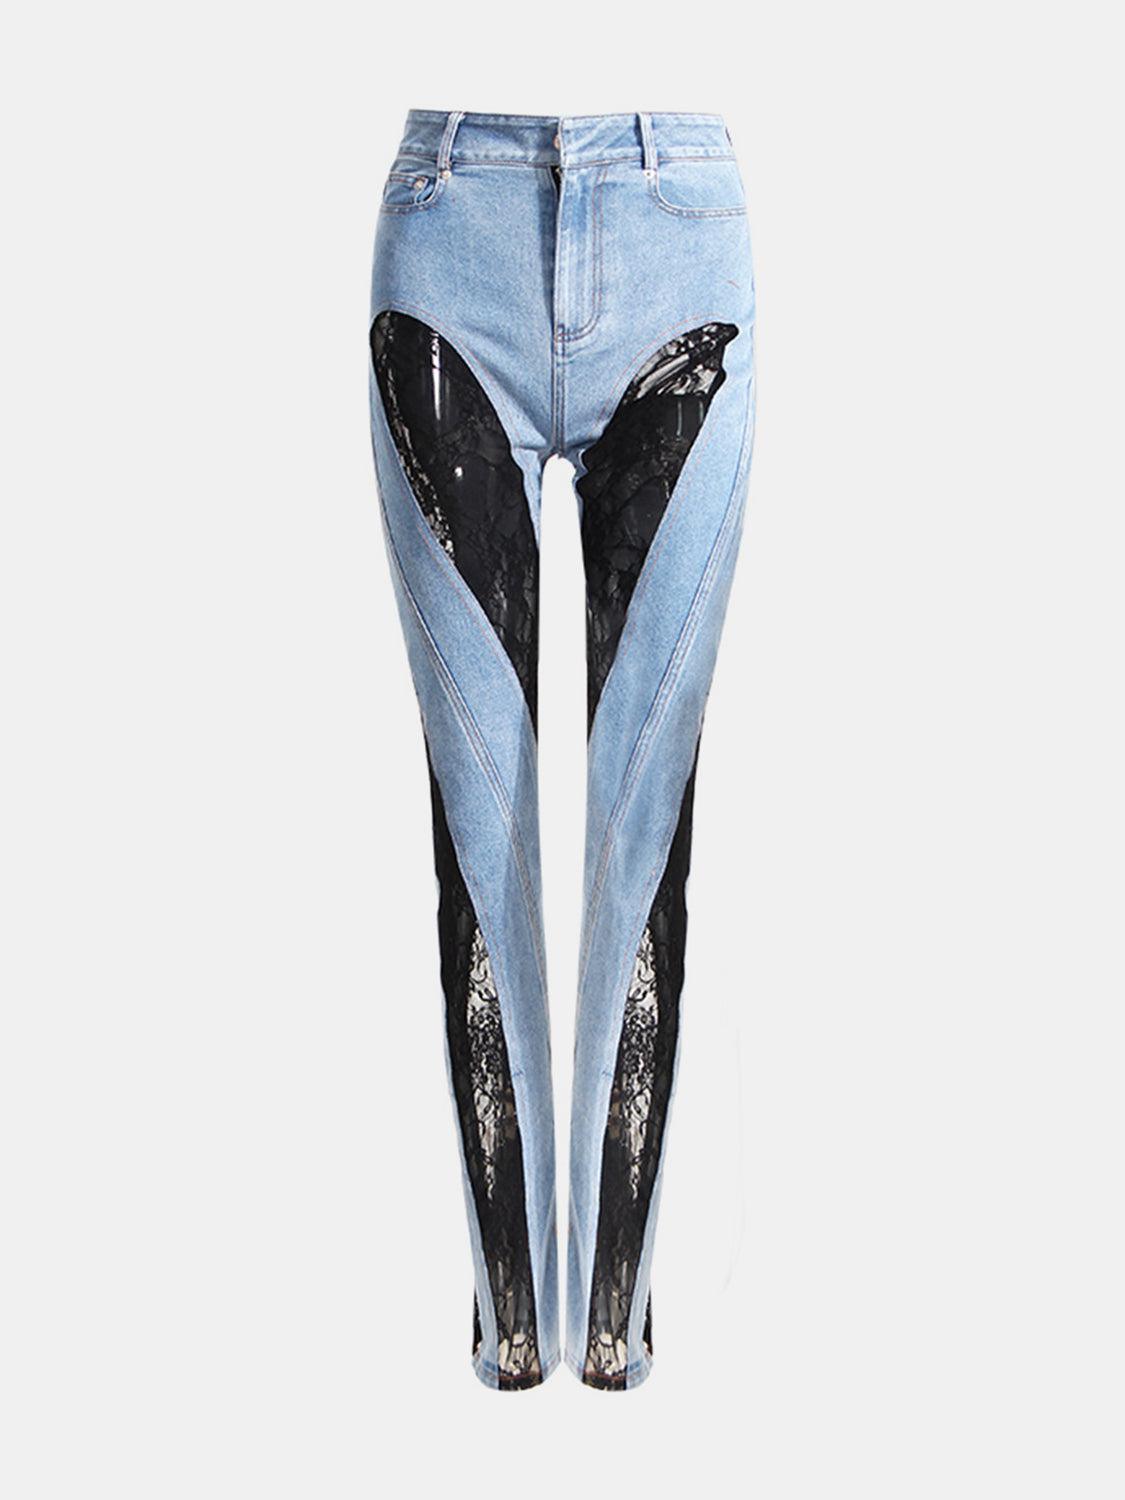 a pair of jeans with a black bird on them